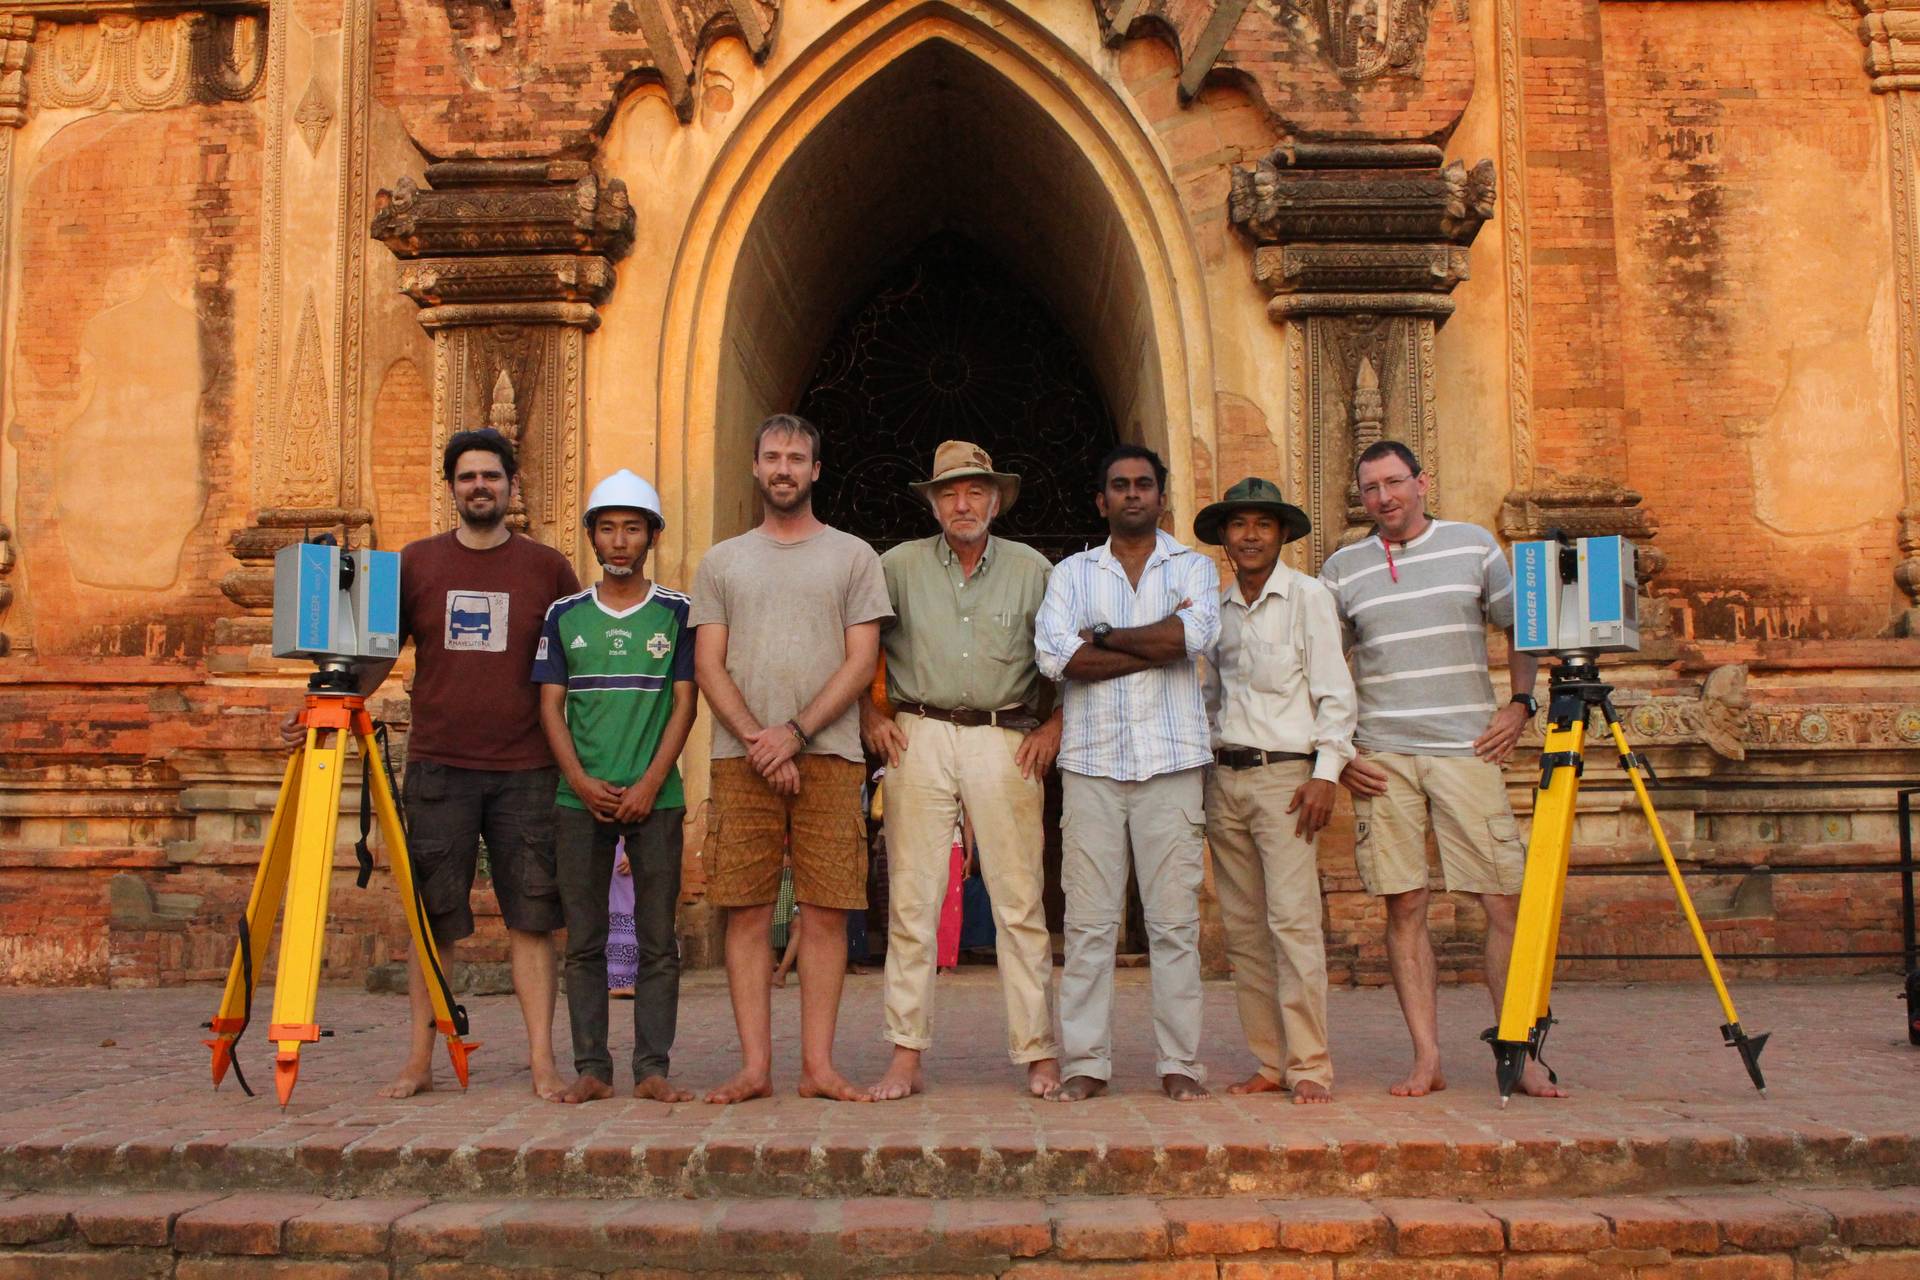 The Zamani team plus two assistants: (from left) Christoph Held, Thu Ya Kyaw (assistant), Stephen Wessels, Emer Prof Heinz Ruther, Roshan Bhurtha, Soe Win Htay (assistant) and Ralph Schroeder.